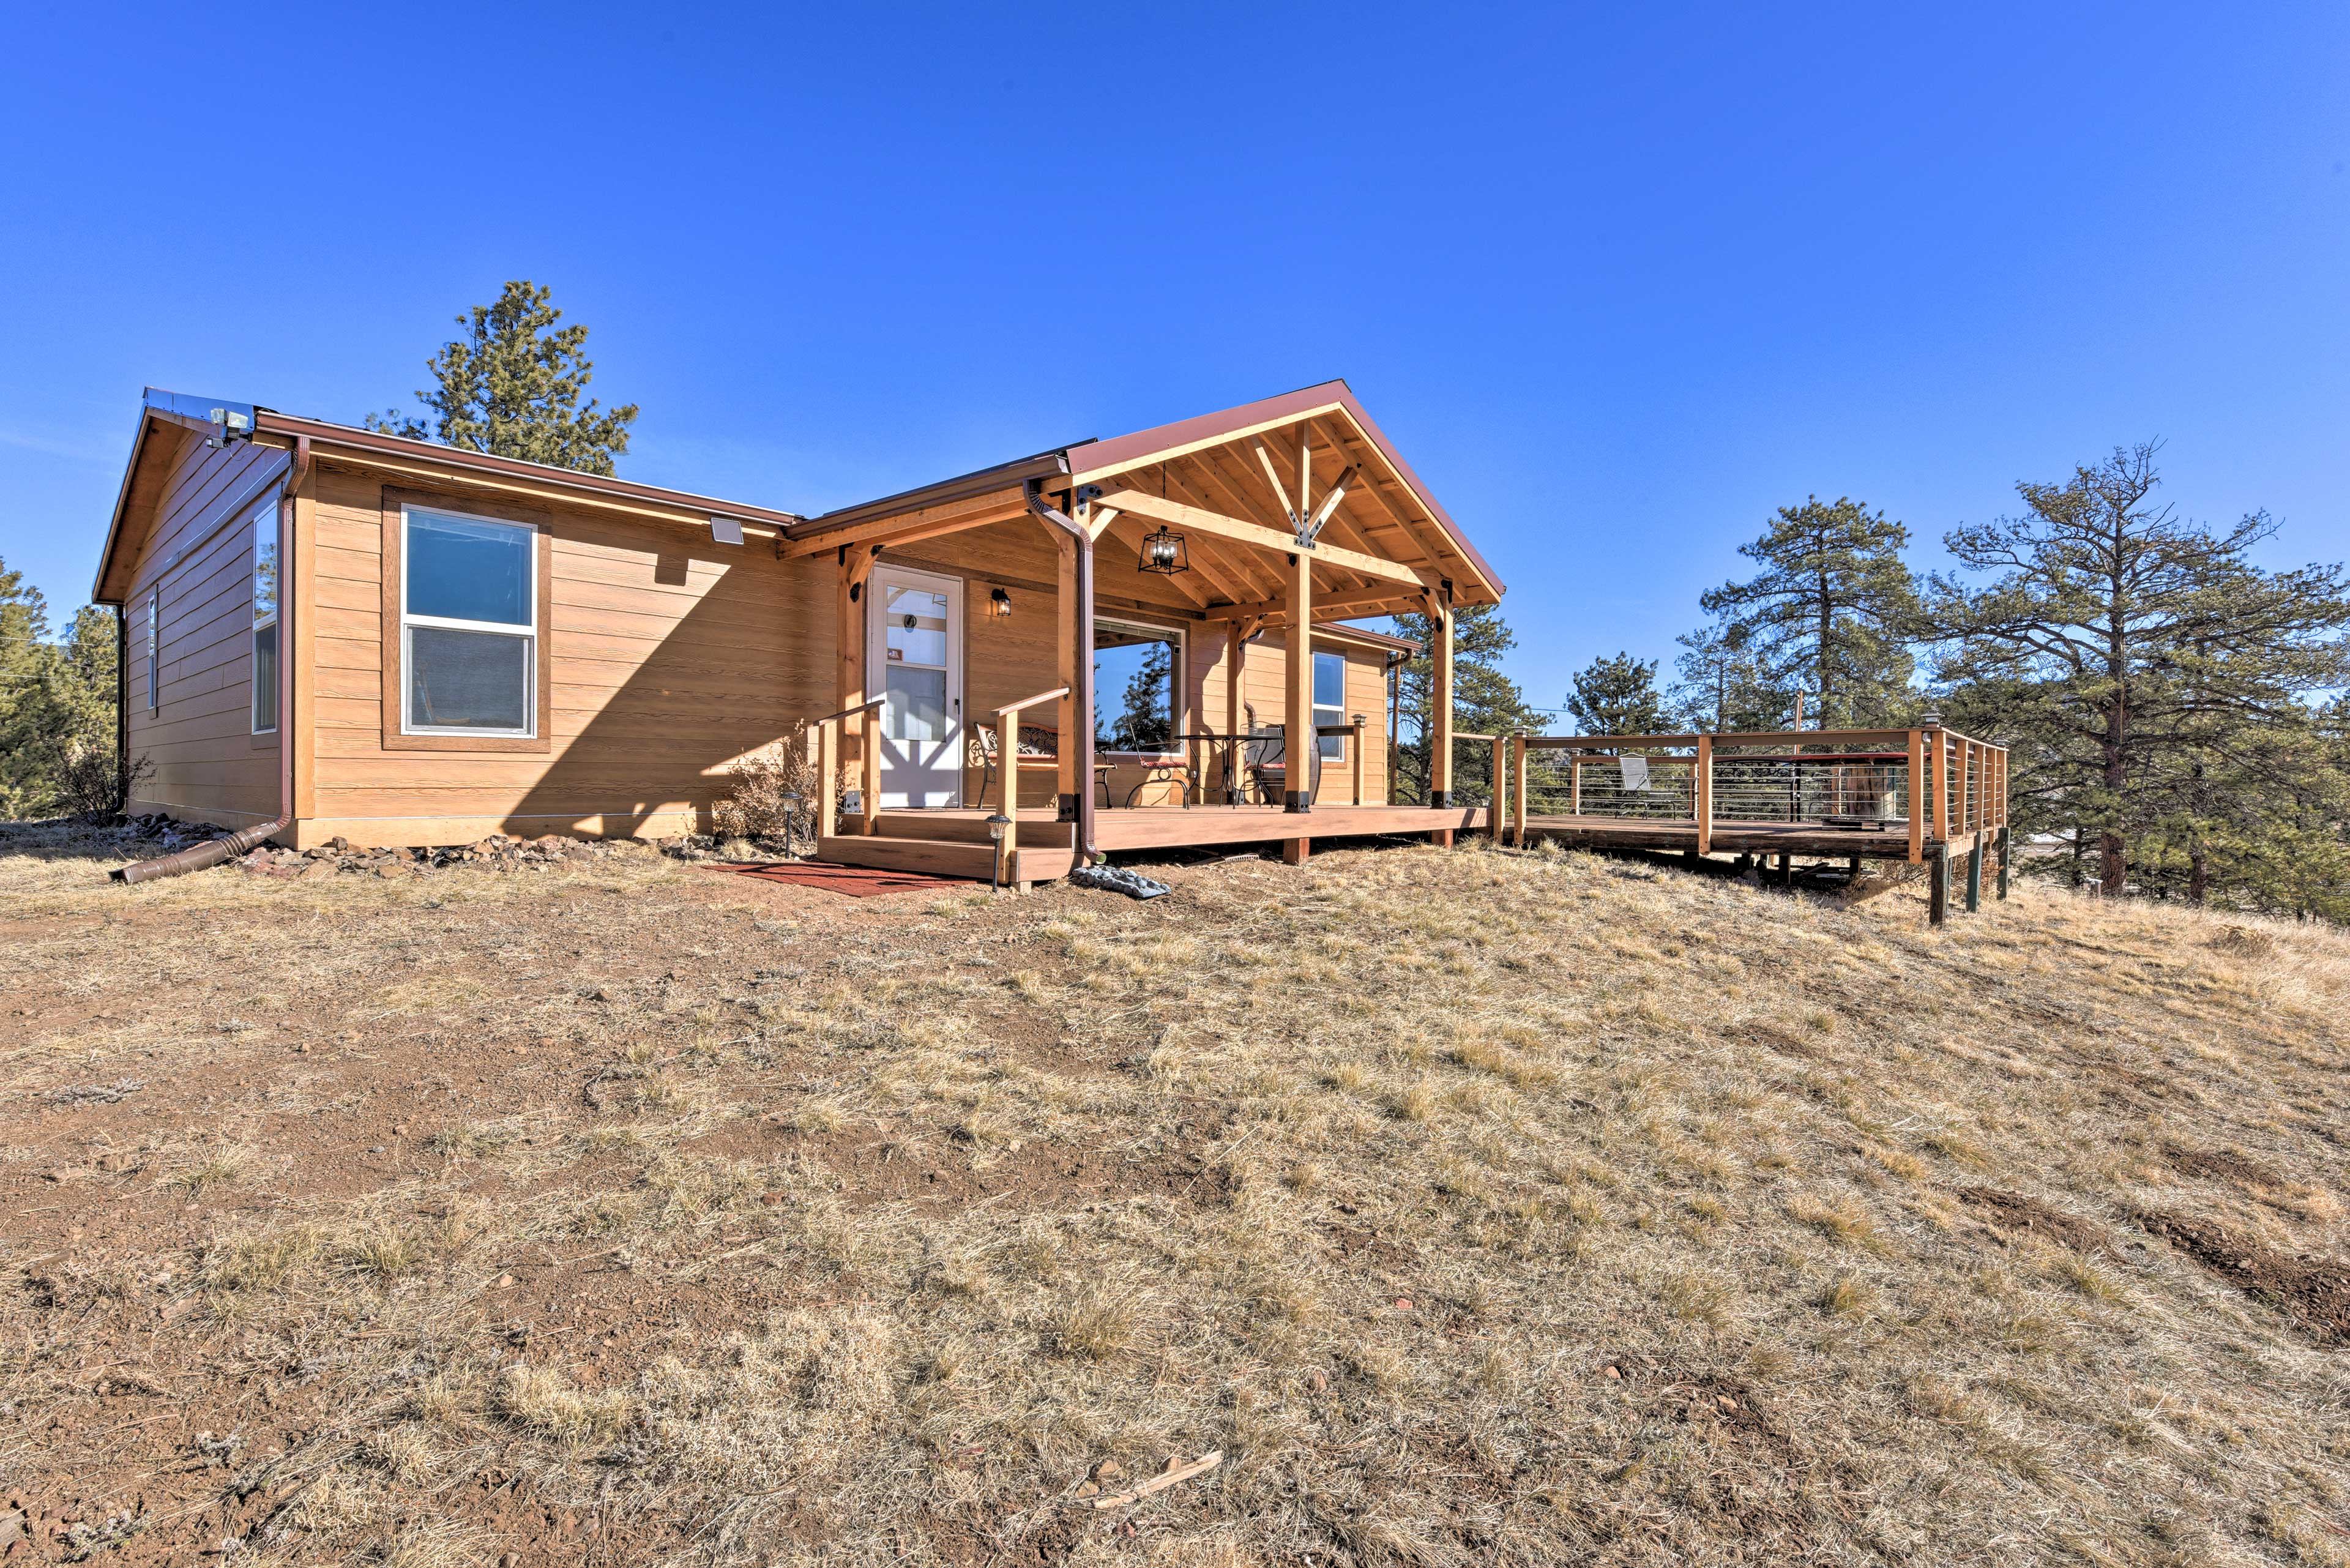 This modern hideaway is just minutes from the charming mountain town of Guffey.